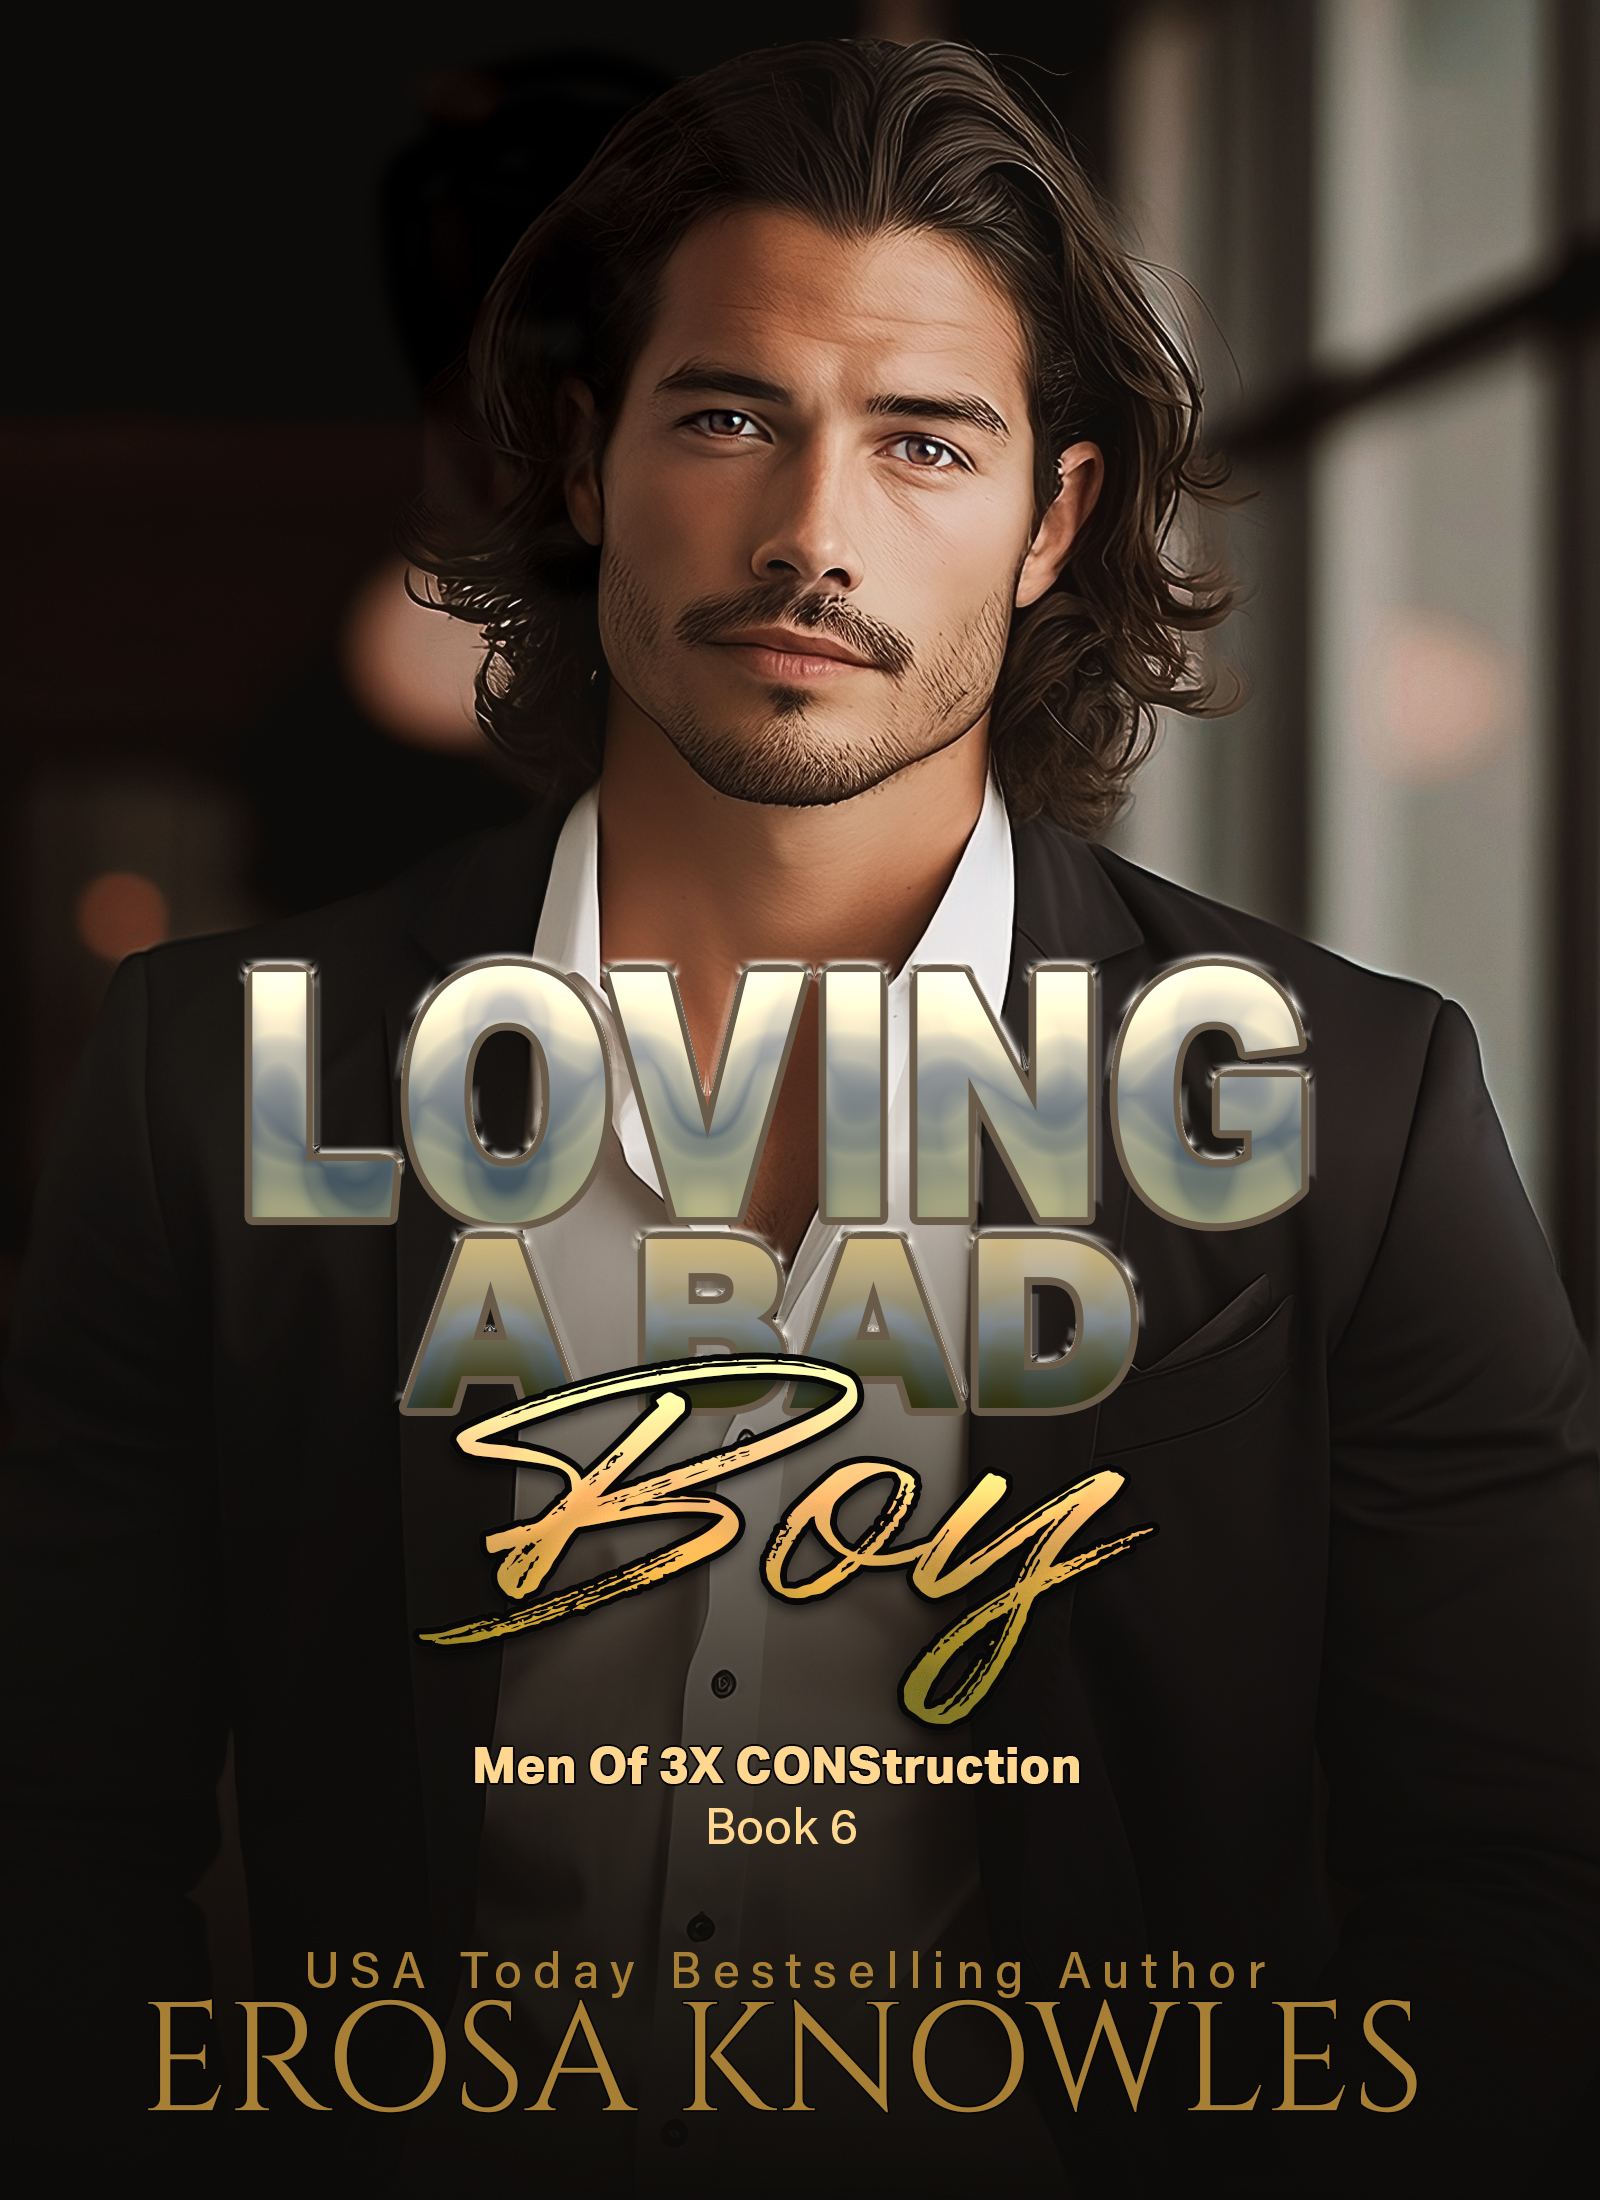 Loving a Bad Boy (The Men of 3X CONStruction Book 6)